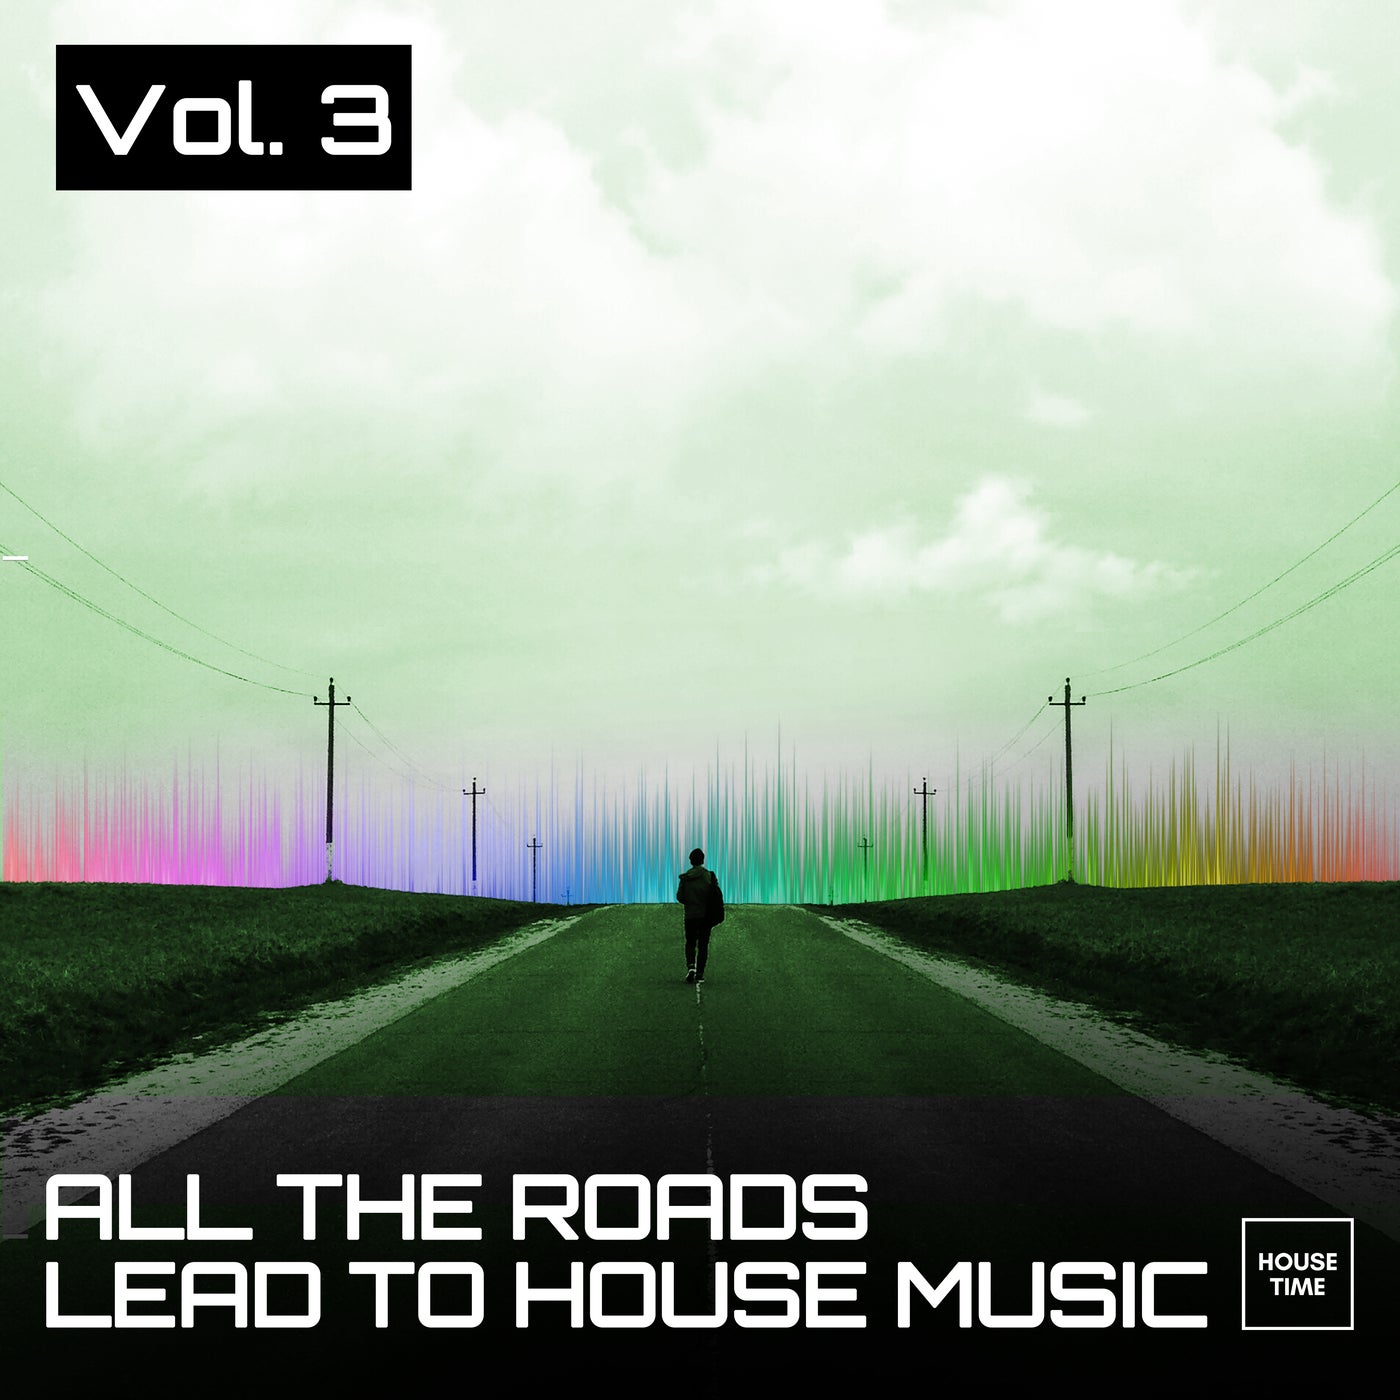 All the Roads Lead to House Music, Vol. 3